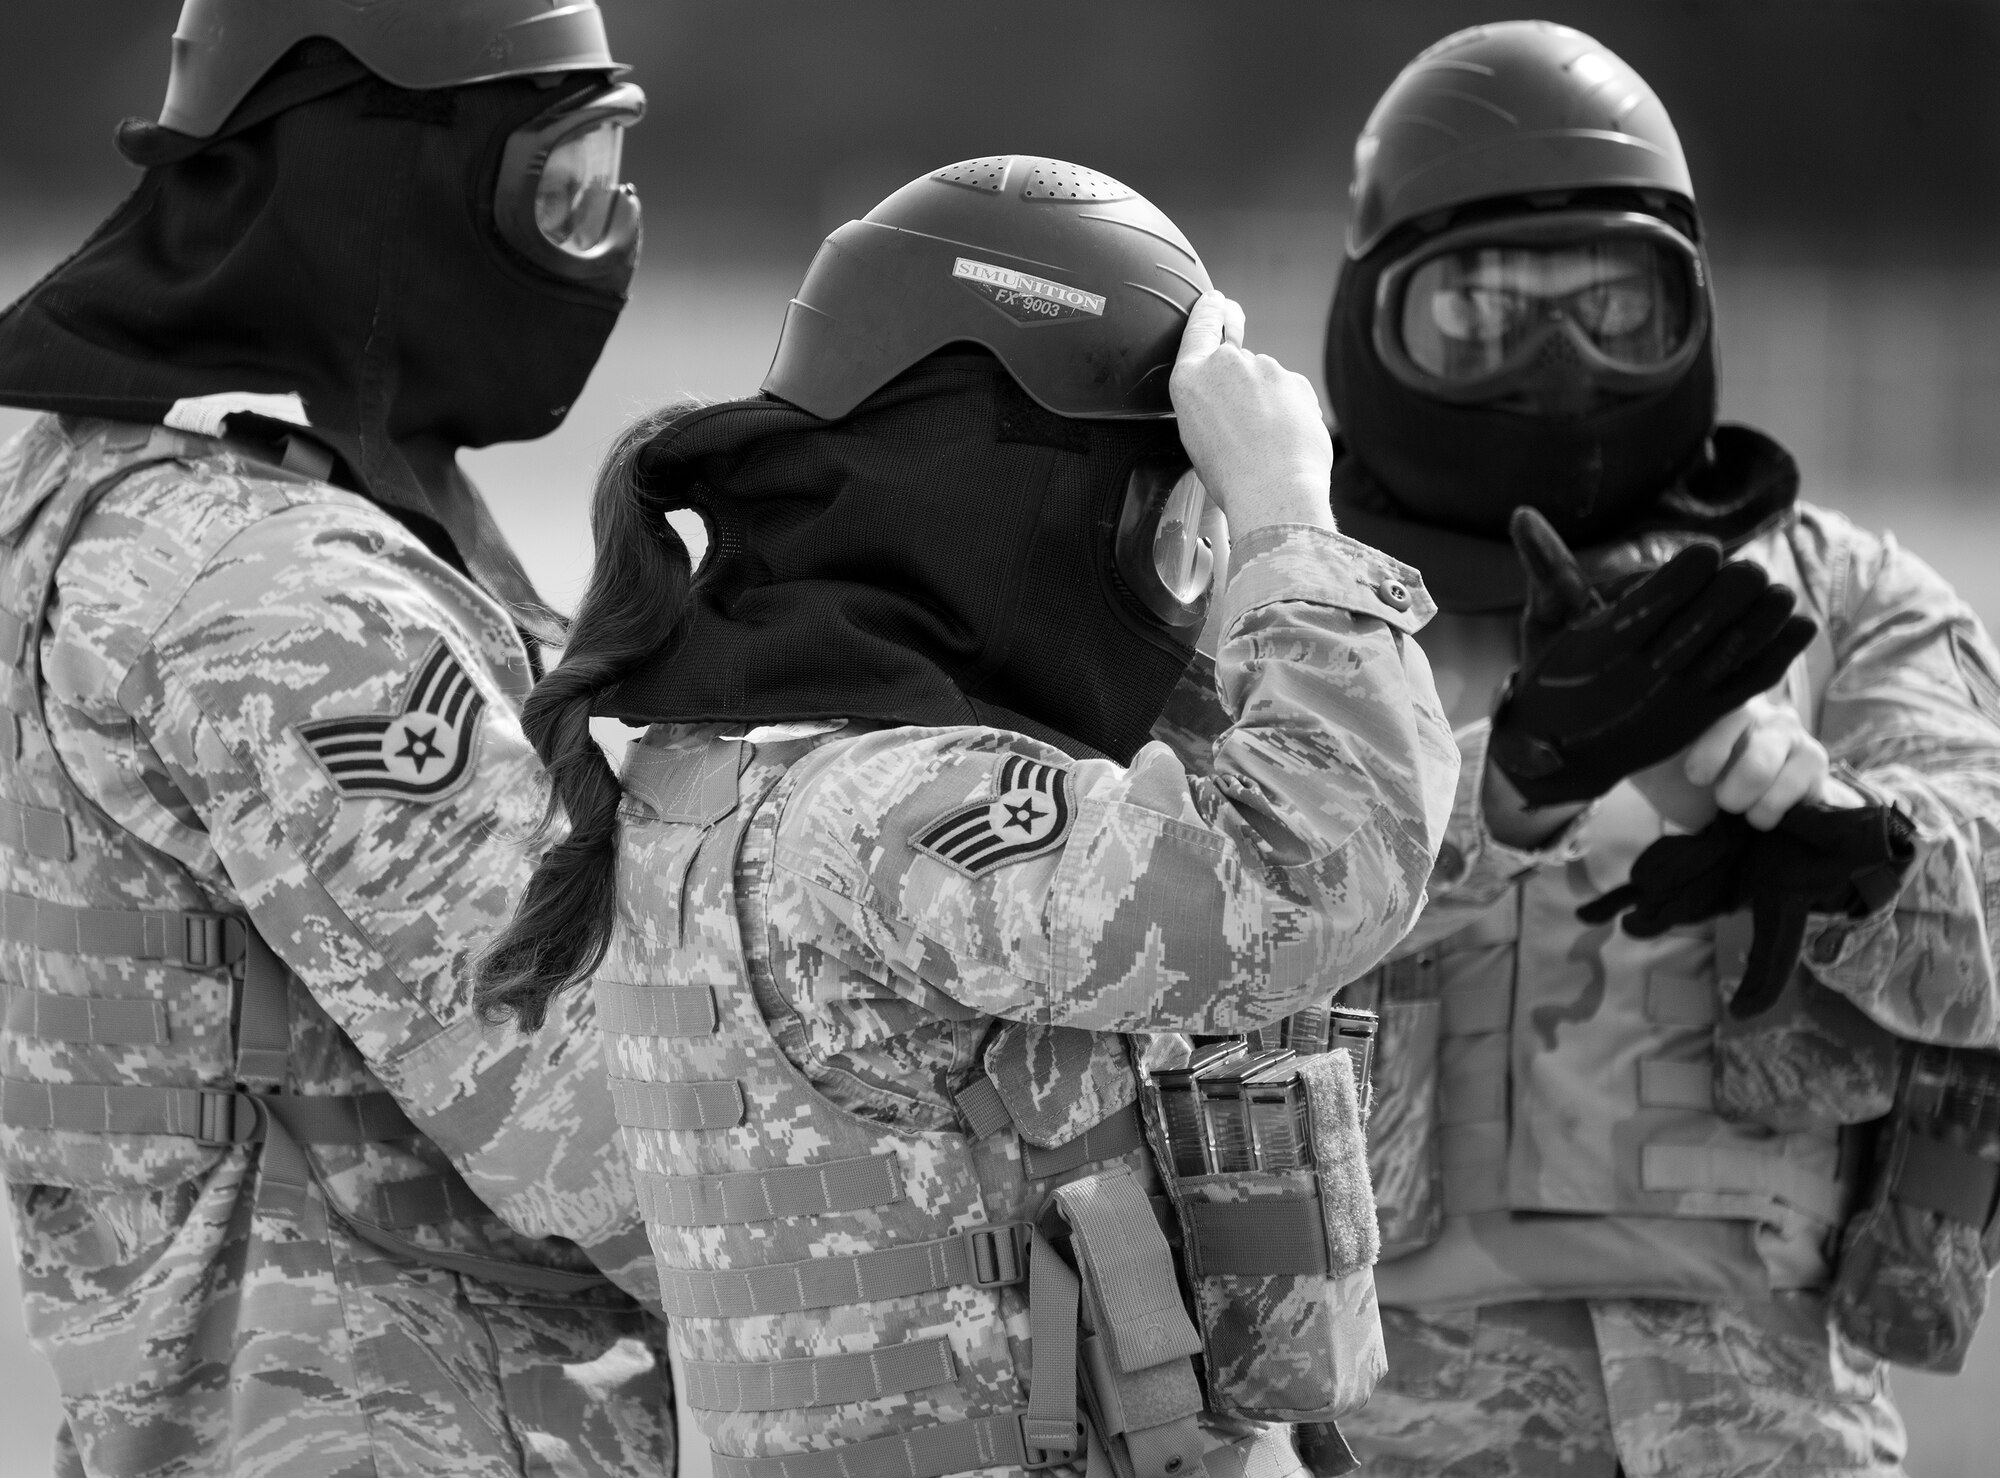 A 96th Security Forces Squadron Airman secures her helmet prior to a shoot, move and communicate drill at Eglin Air Force Base, Fla.  The mandatory training requirement is in addition to annual weapons qualification training.  The exercise consists of Airmen firing simmunition ammo while advancing toward, away from and to the side of a target.  This is followed by a building sweep and clear drill. Eglin’s security forces personnel protect and defend the main base, facilities, gates, Duke Field, 7th SFG compound and land and water ranges.  (U.S. Air Force photo/Tech. Sgt. Sam King)